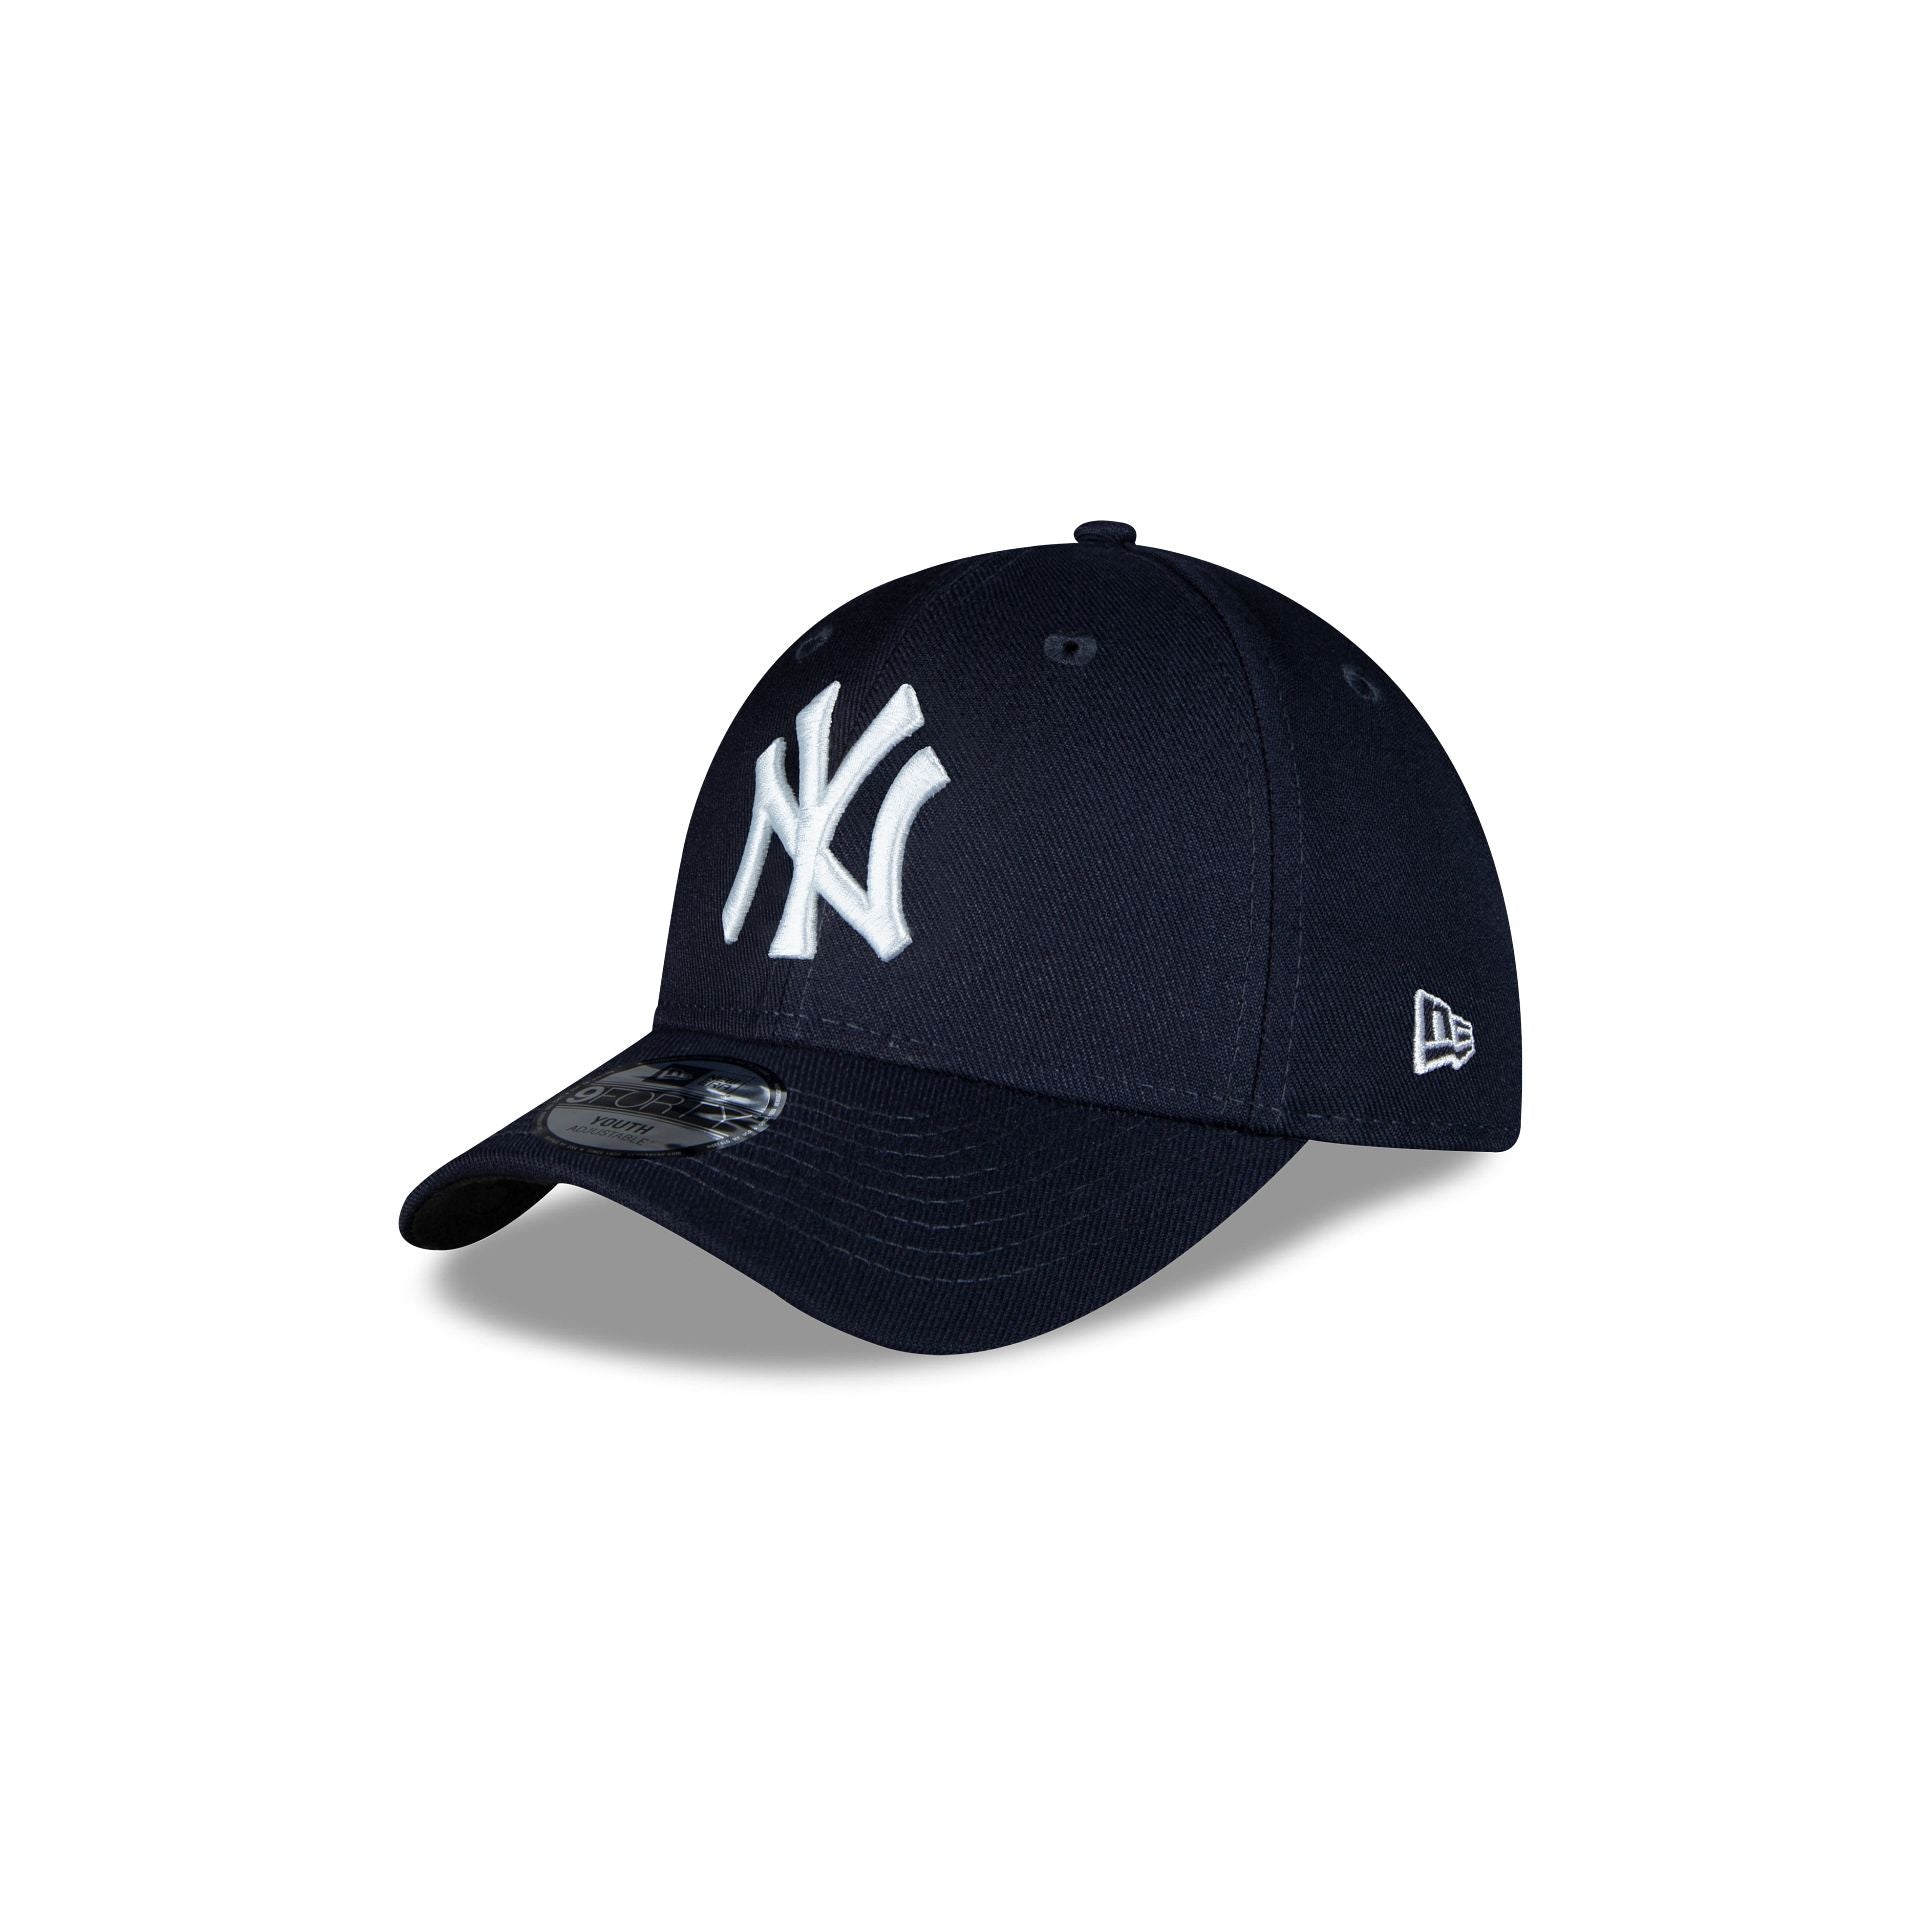 New York Yankees New Era League Cap Adjustable 9FORTY Hat The Kids –